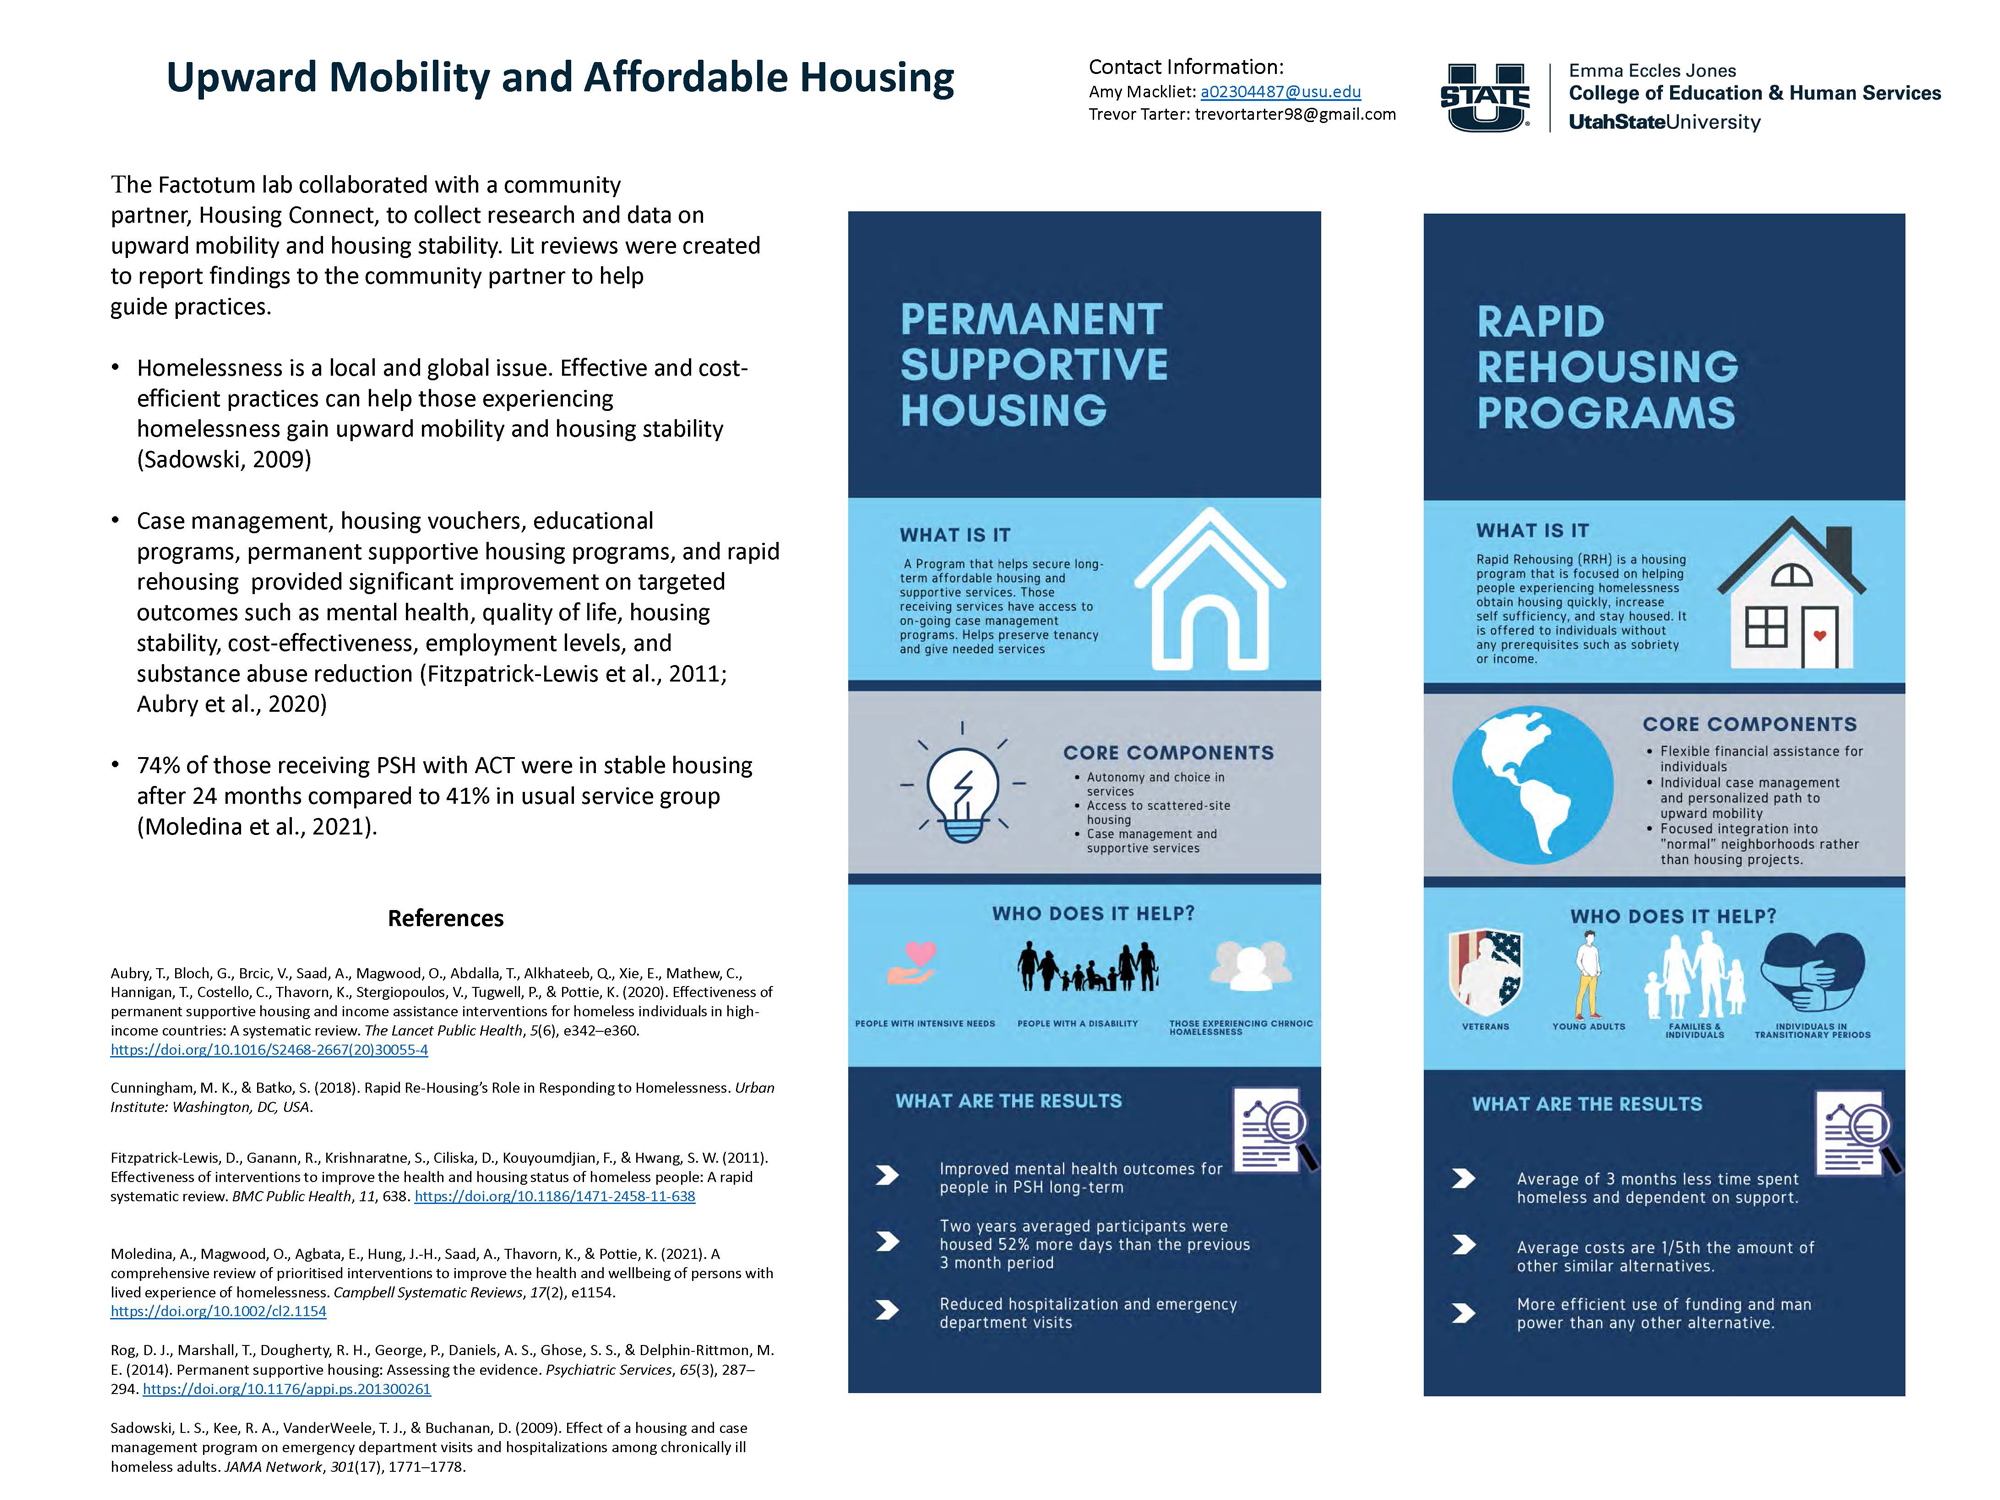 The Factotum Lab collaborated with a community partner, Housing Connect, to collect research and data on upward mobility and housing stability. Literature reviews were created to report findings to the community partner to help guide practices.